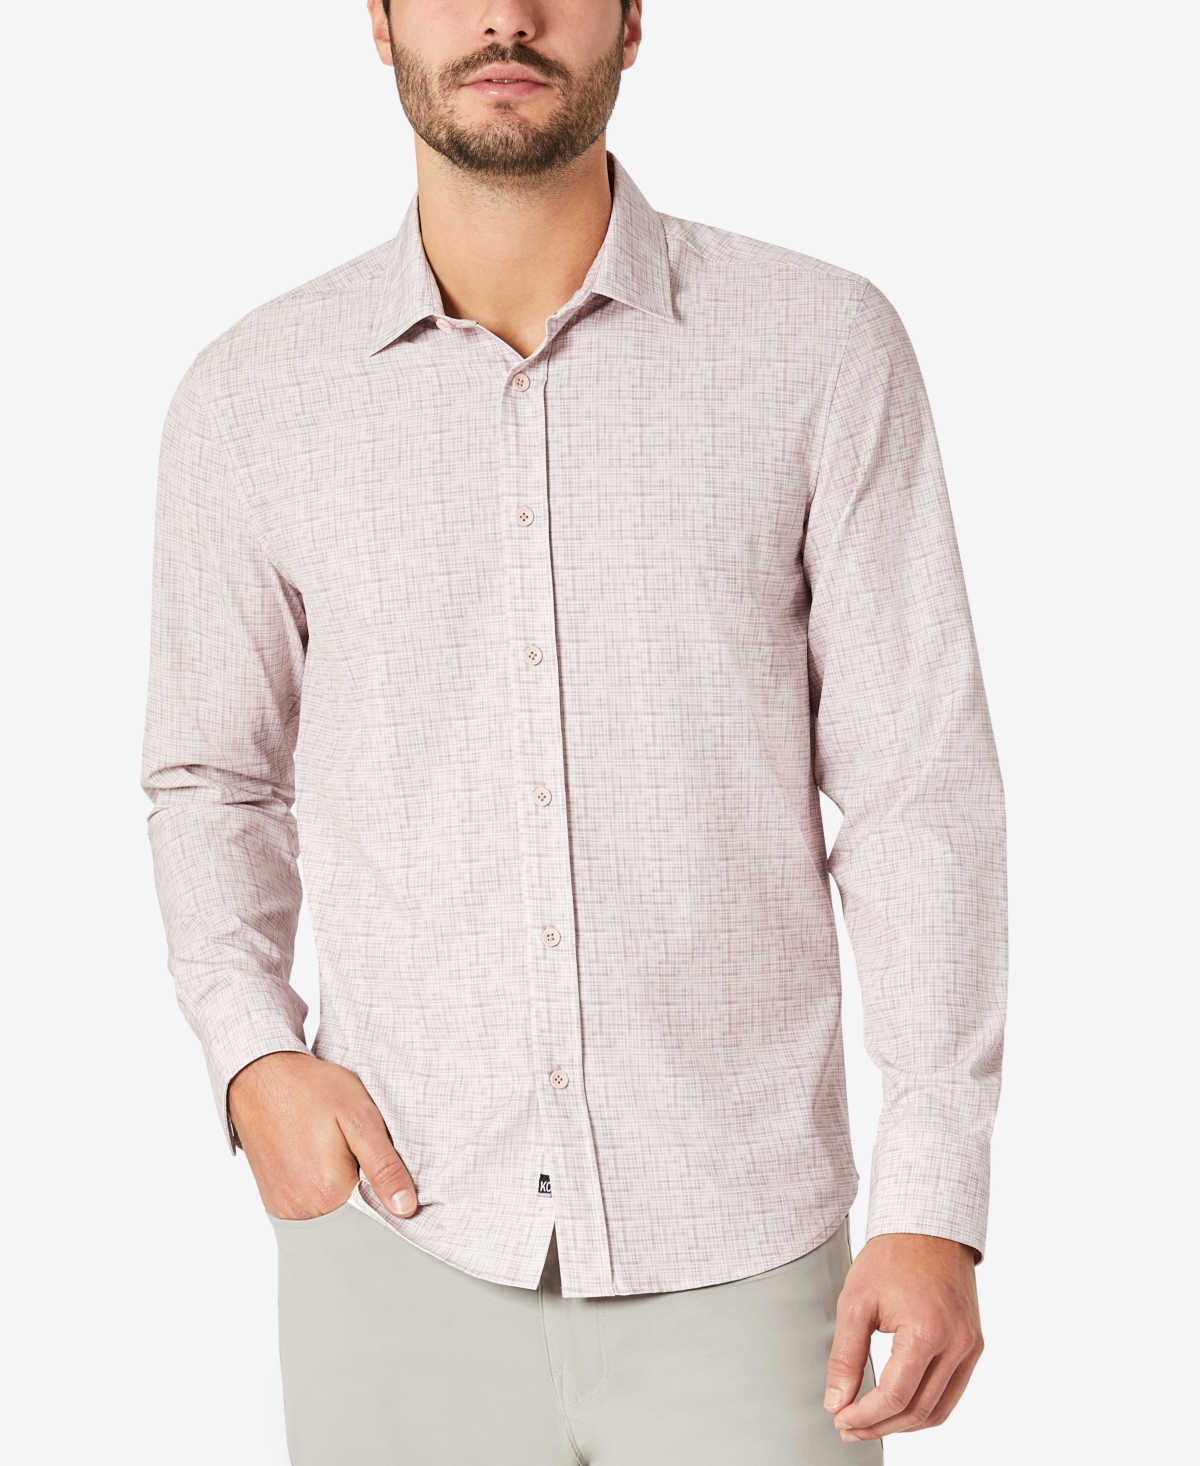 Kenneth Cole Men's Slim Fit Performance Shirt In Pink Plaid